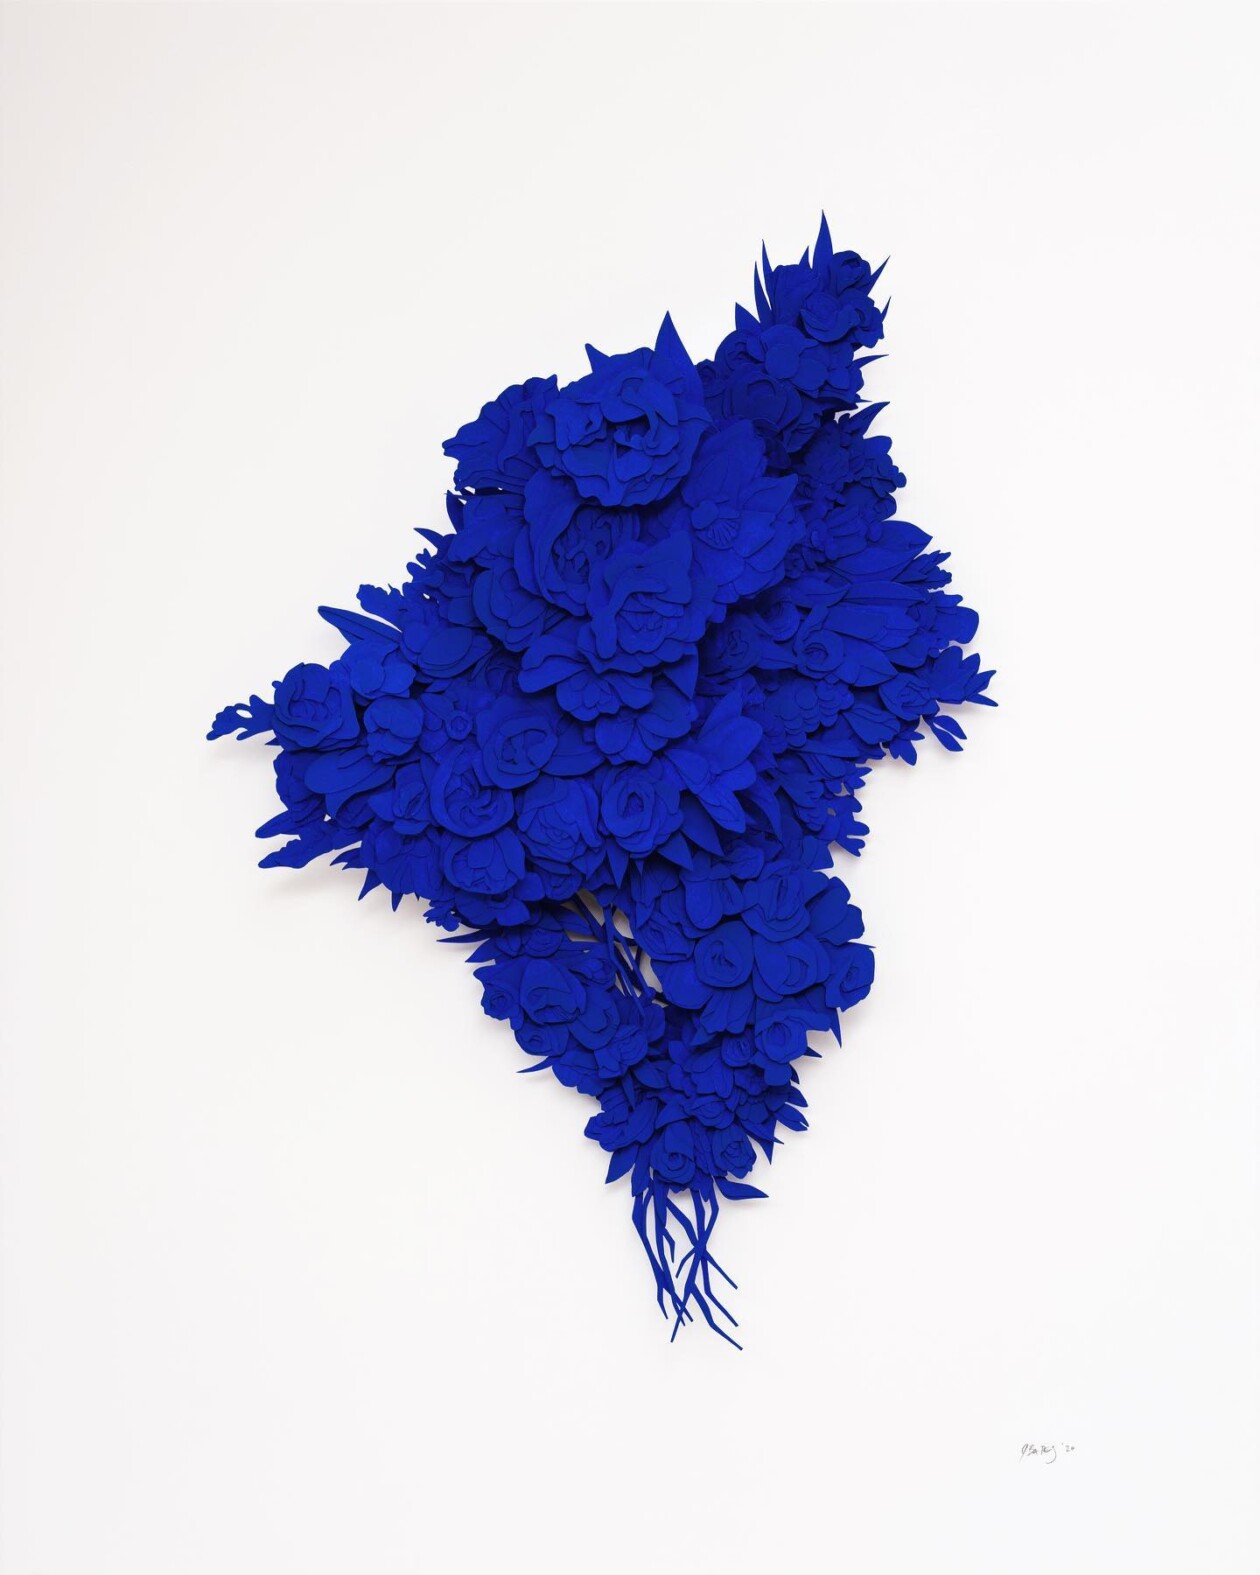 Gorgeously Intricate Floral Paper Cutting Sculptures By Joey Bates (3)